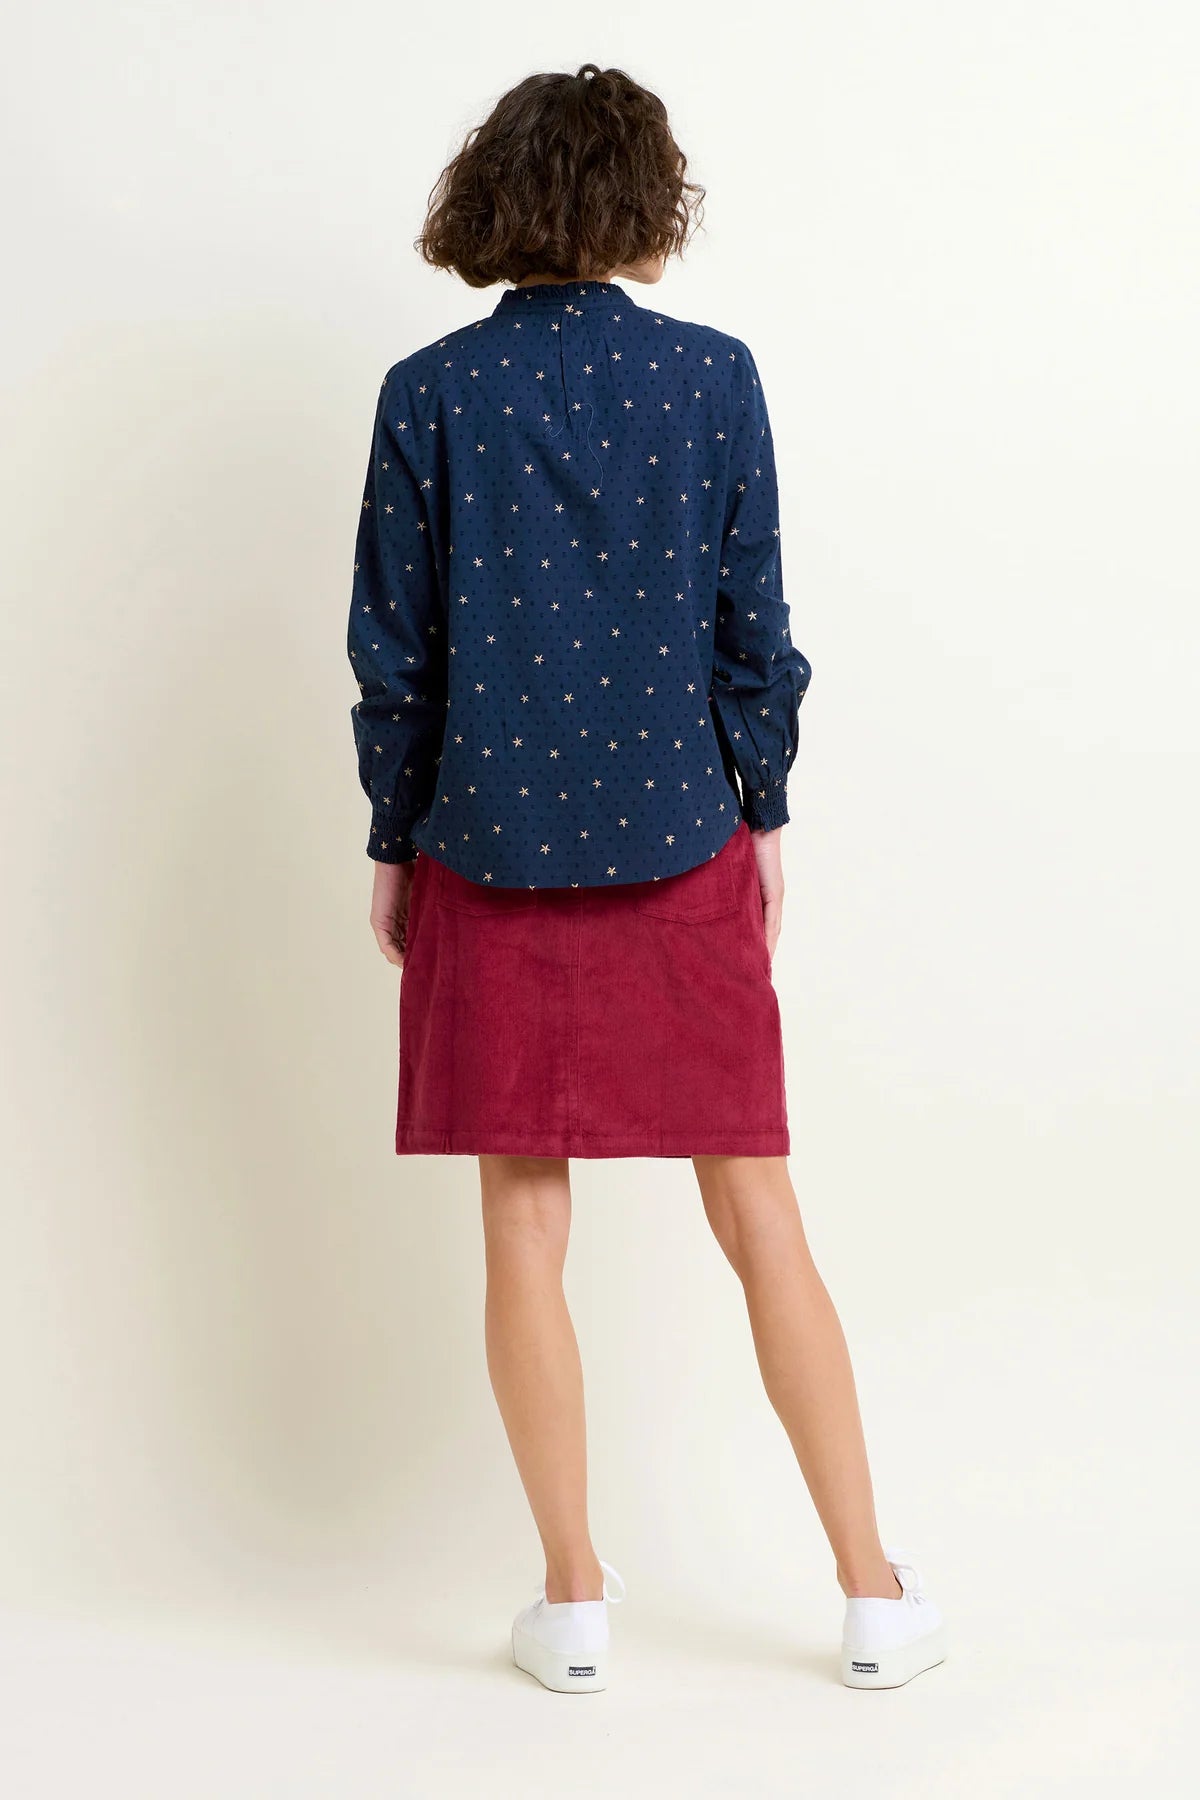 Stars Embroidered Blouse